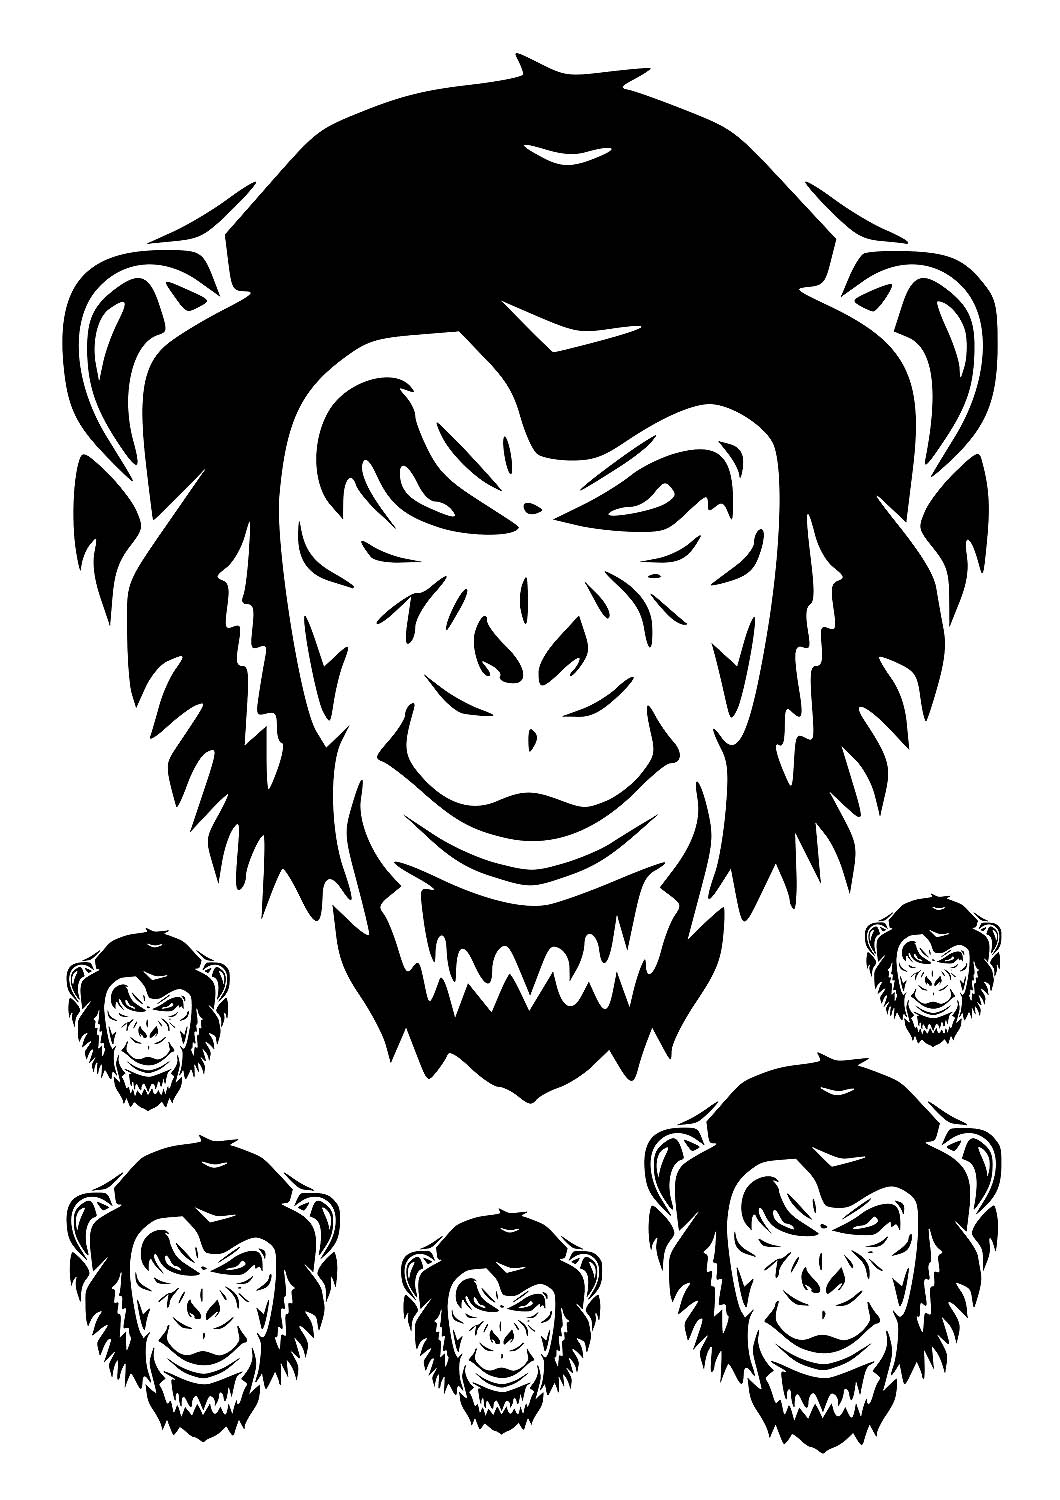 Monkey stencils - Free stencils and template cutout printable